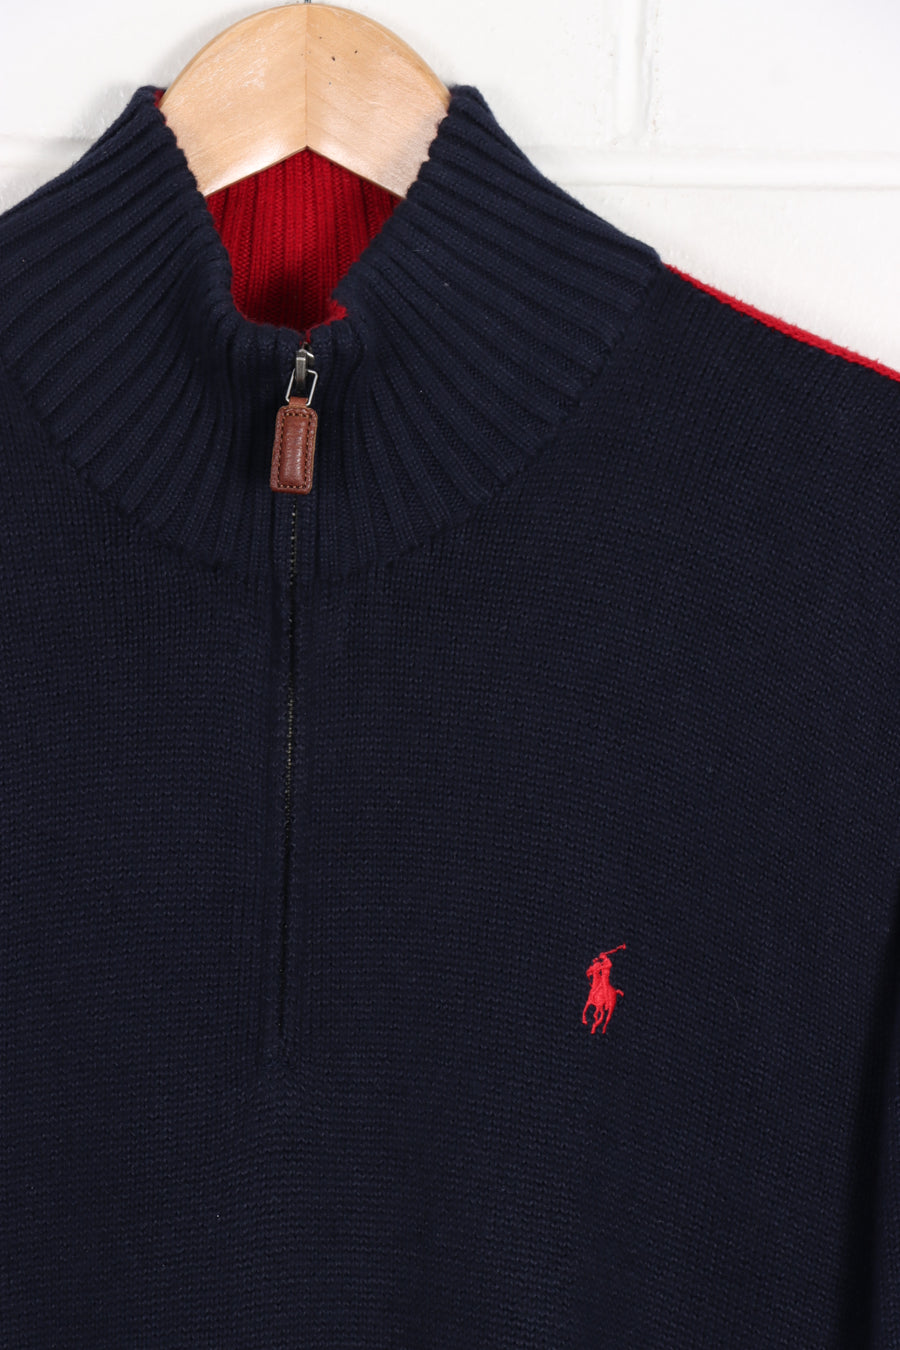 POLO RALPH LAUREN Navy & Red Embroidered 1/4 Zip Sweater Knit (M)